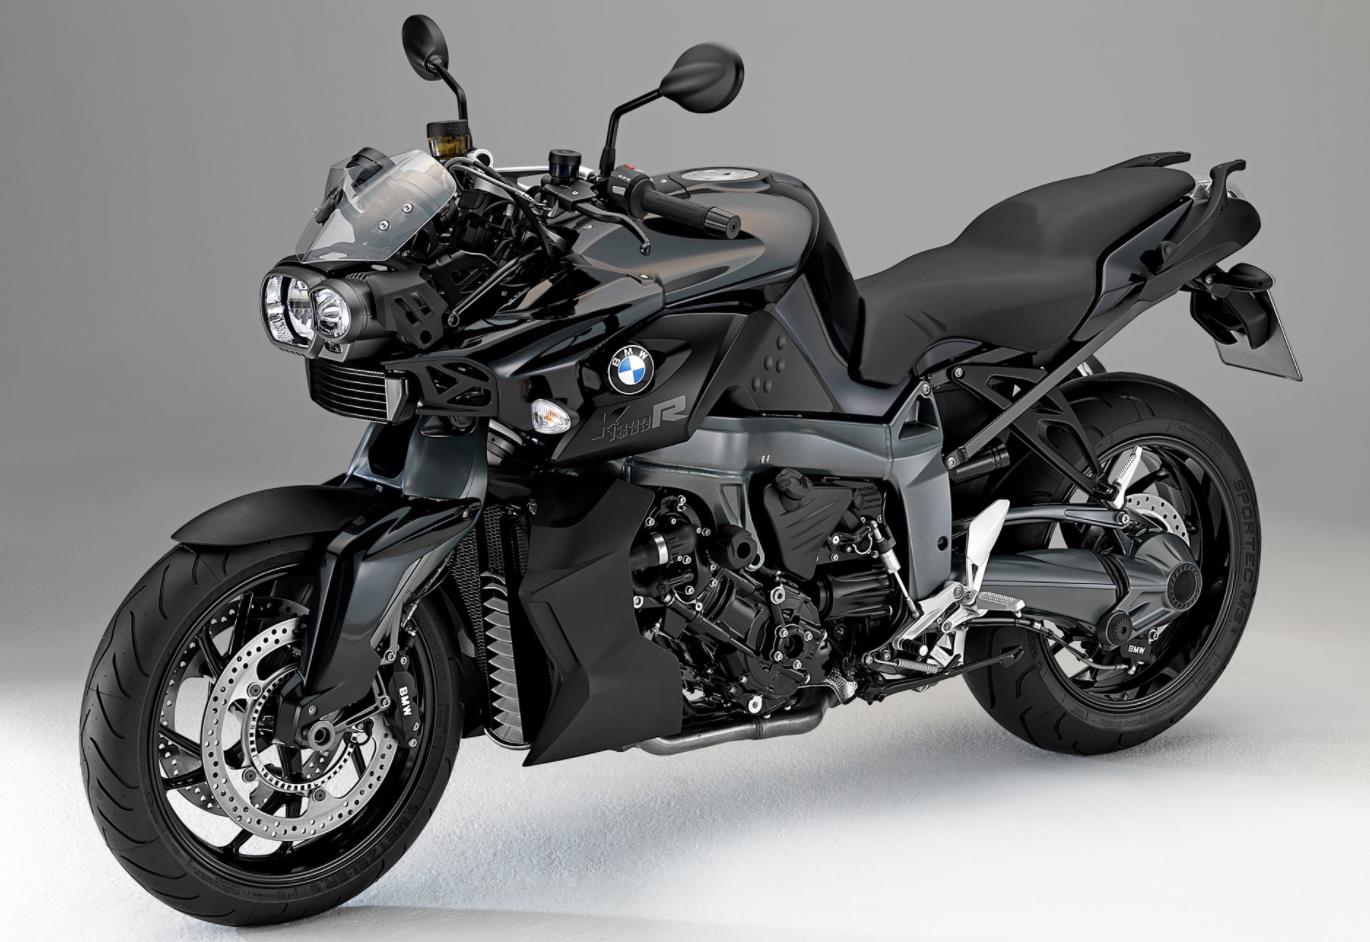 Bmw Bike Price Cheaper Than Retail Price Buy Clothing Accessories And Lifestyle Products For Women Men